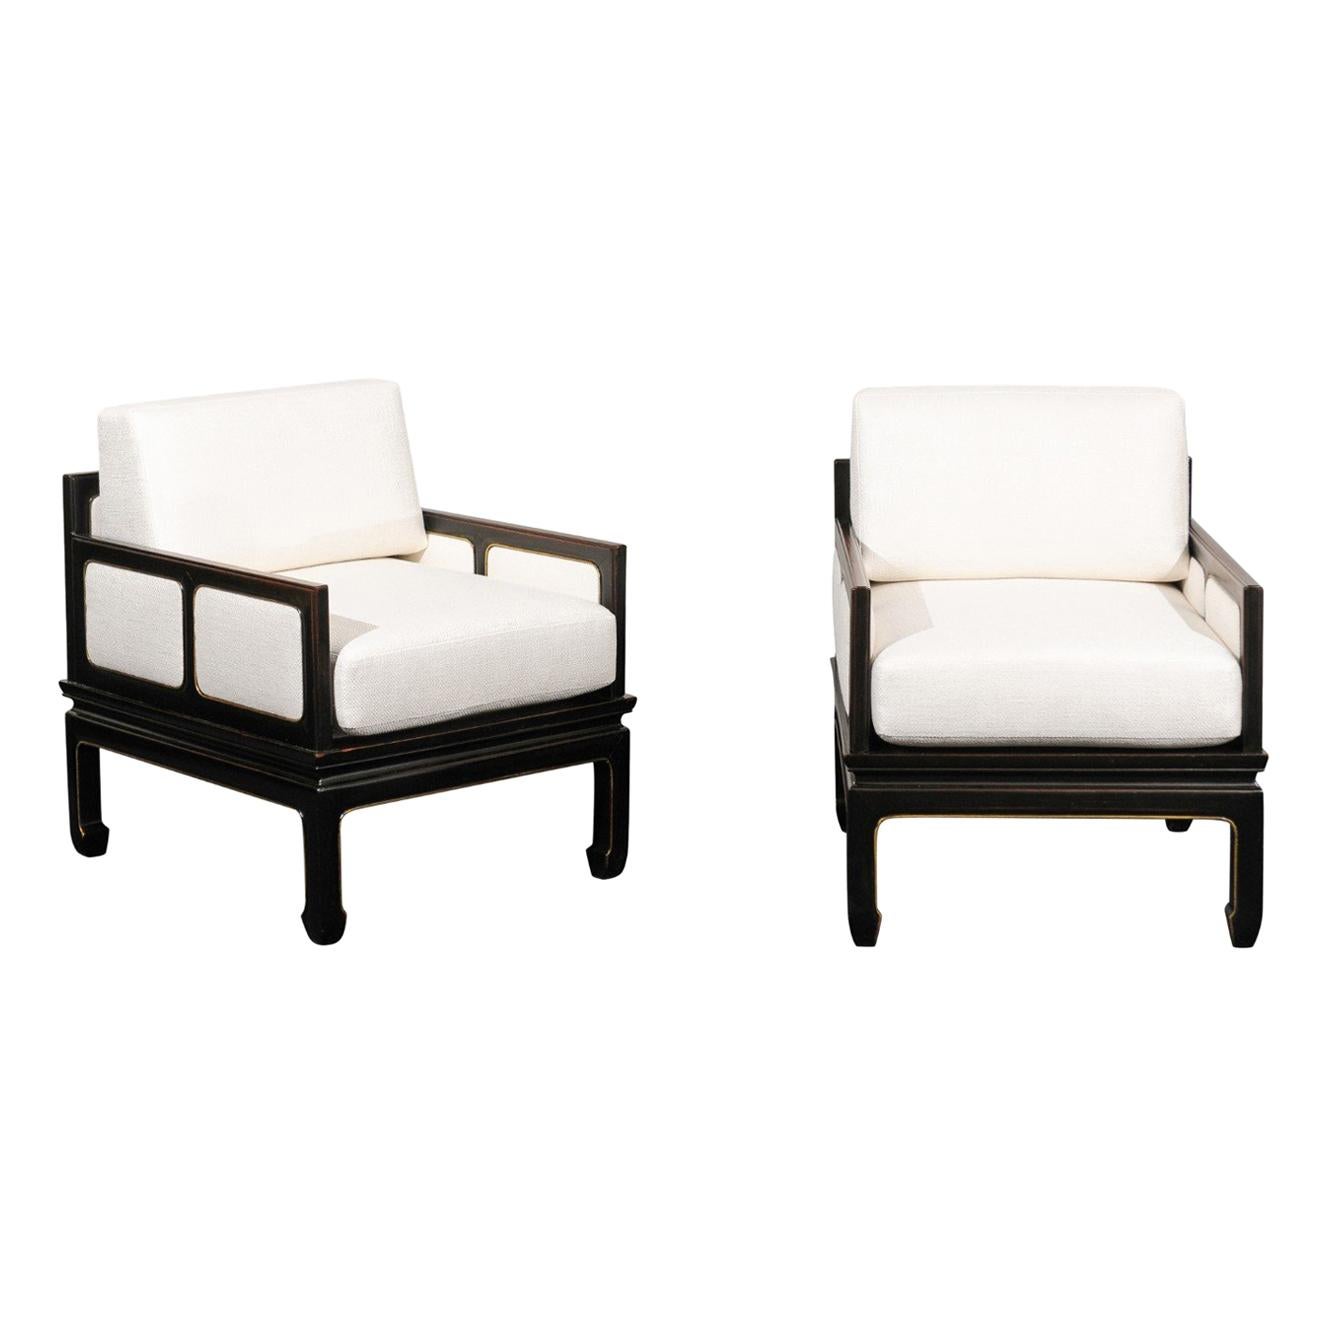 Sophisticated Restored Pair of Lounge Chairs by Baker Furniture, circa 1960